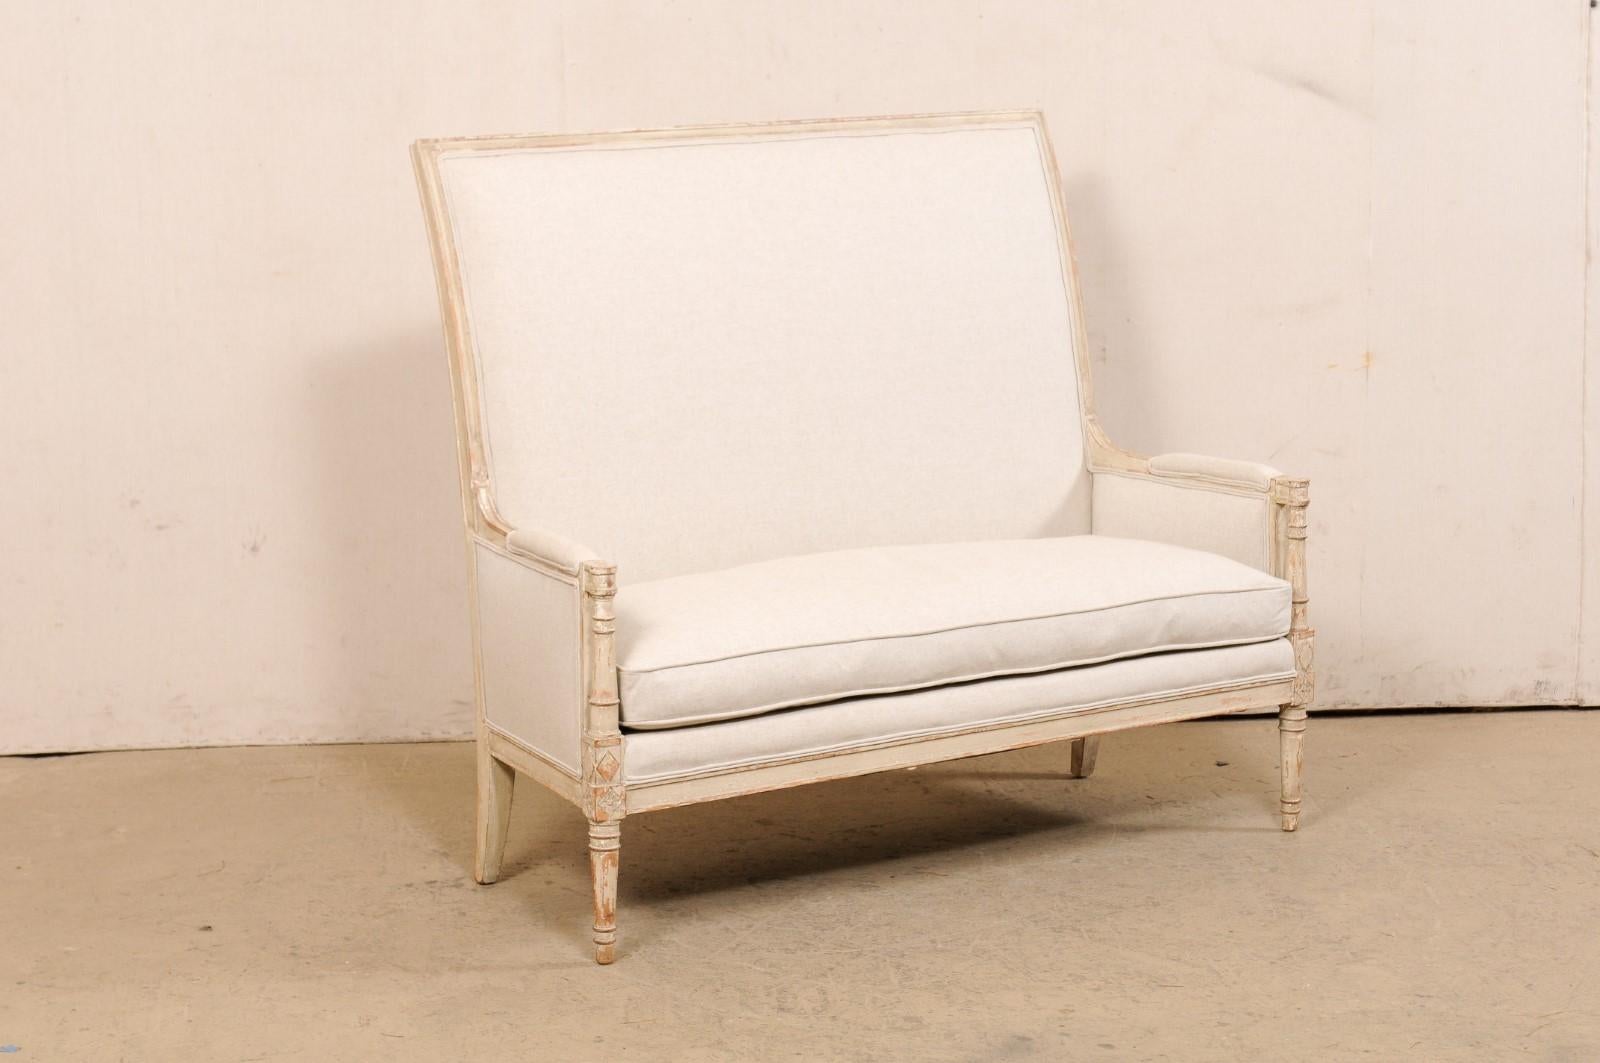 A French style high-back settee designed by US Furniture maker Yale R. Burge. This vintage settee has been finely crafted with French design influences and features a beautiful high-back, upholstered and framed within straight molded wood lines, and